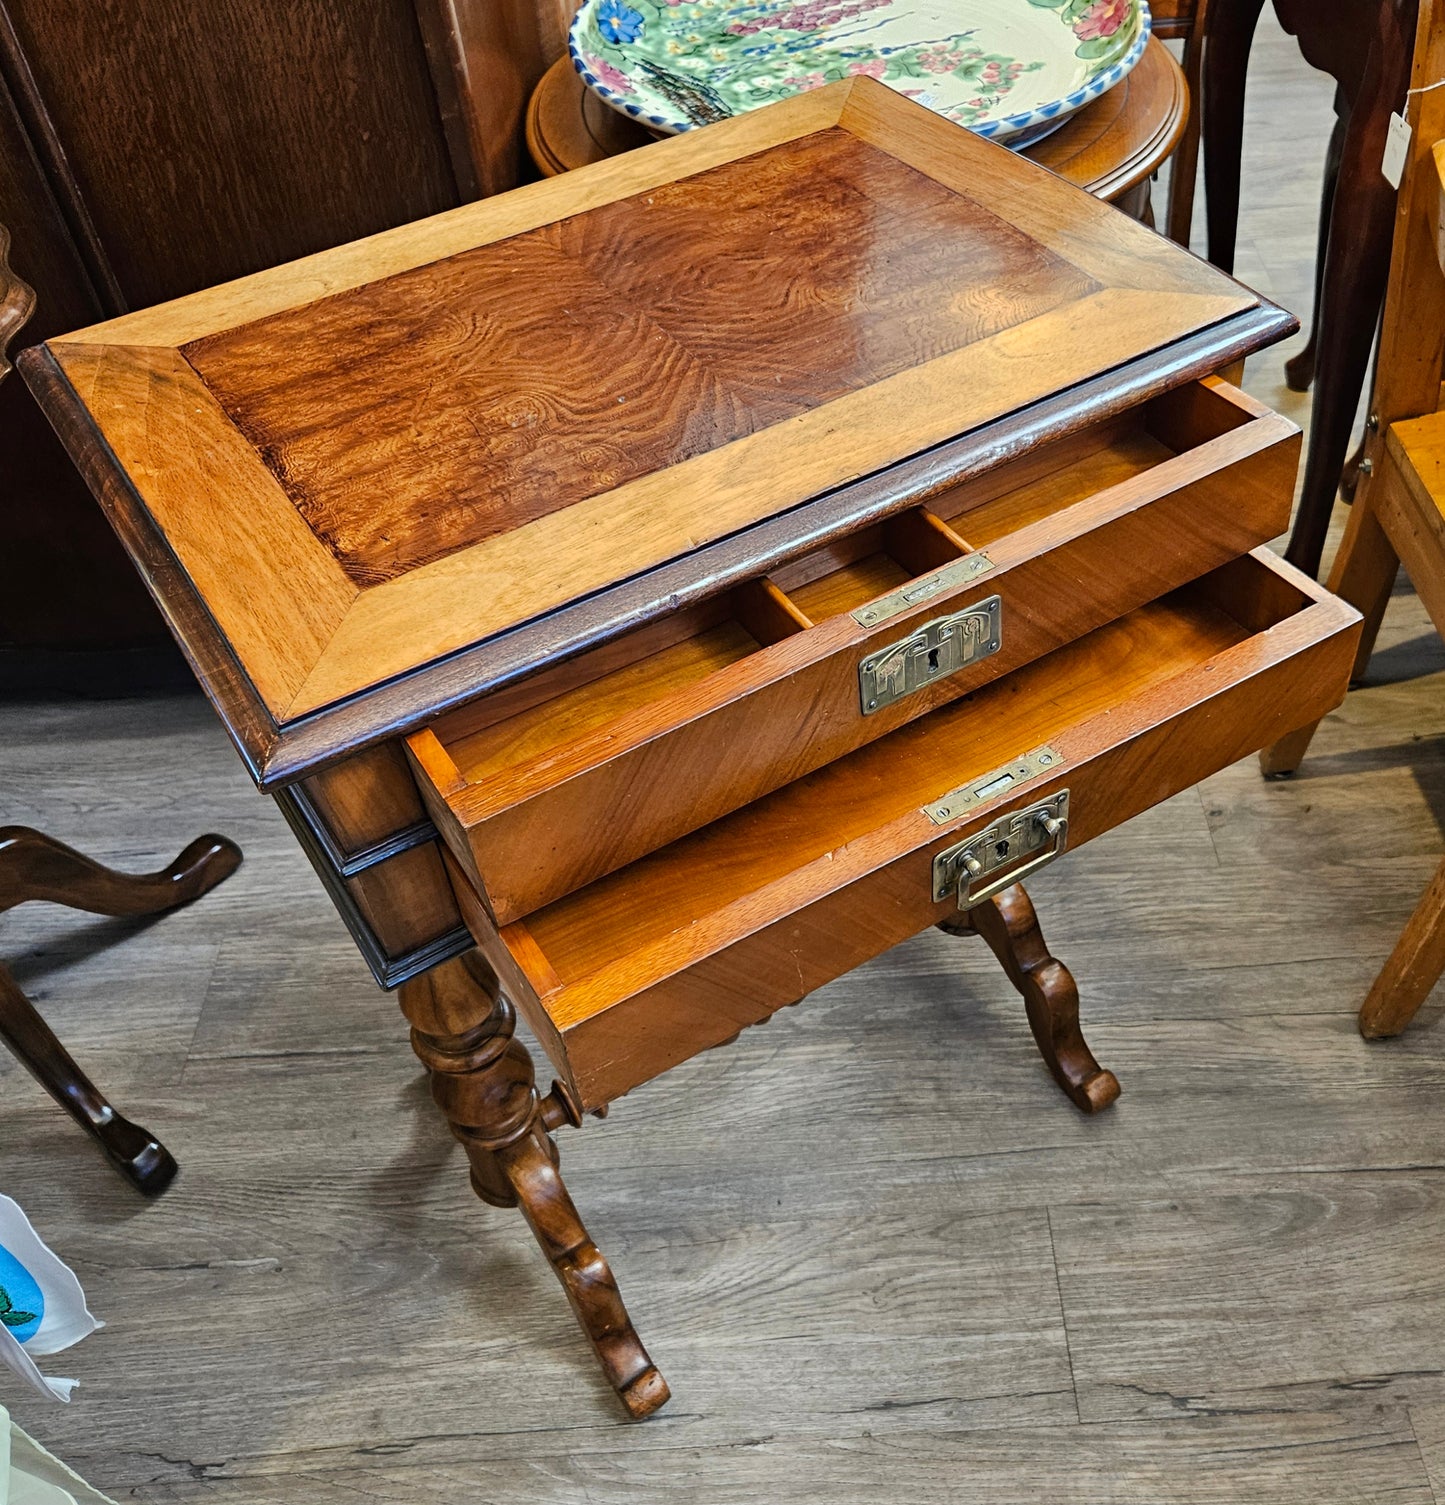 Trestle sewing cabinet/table with key